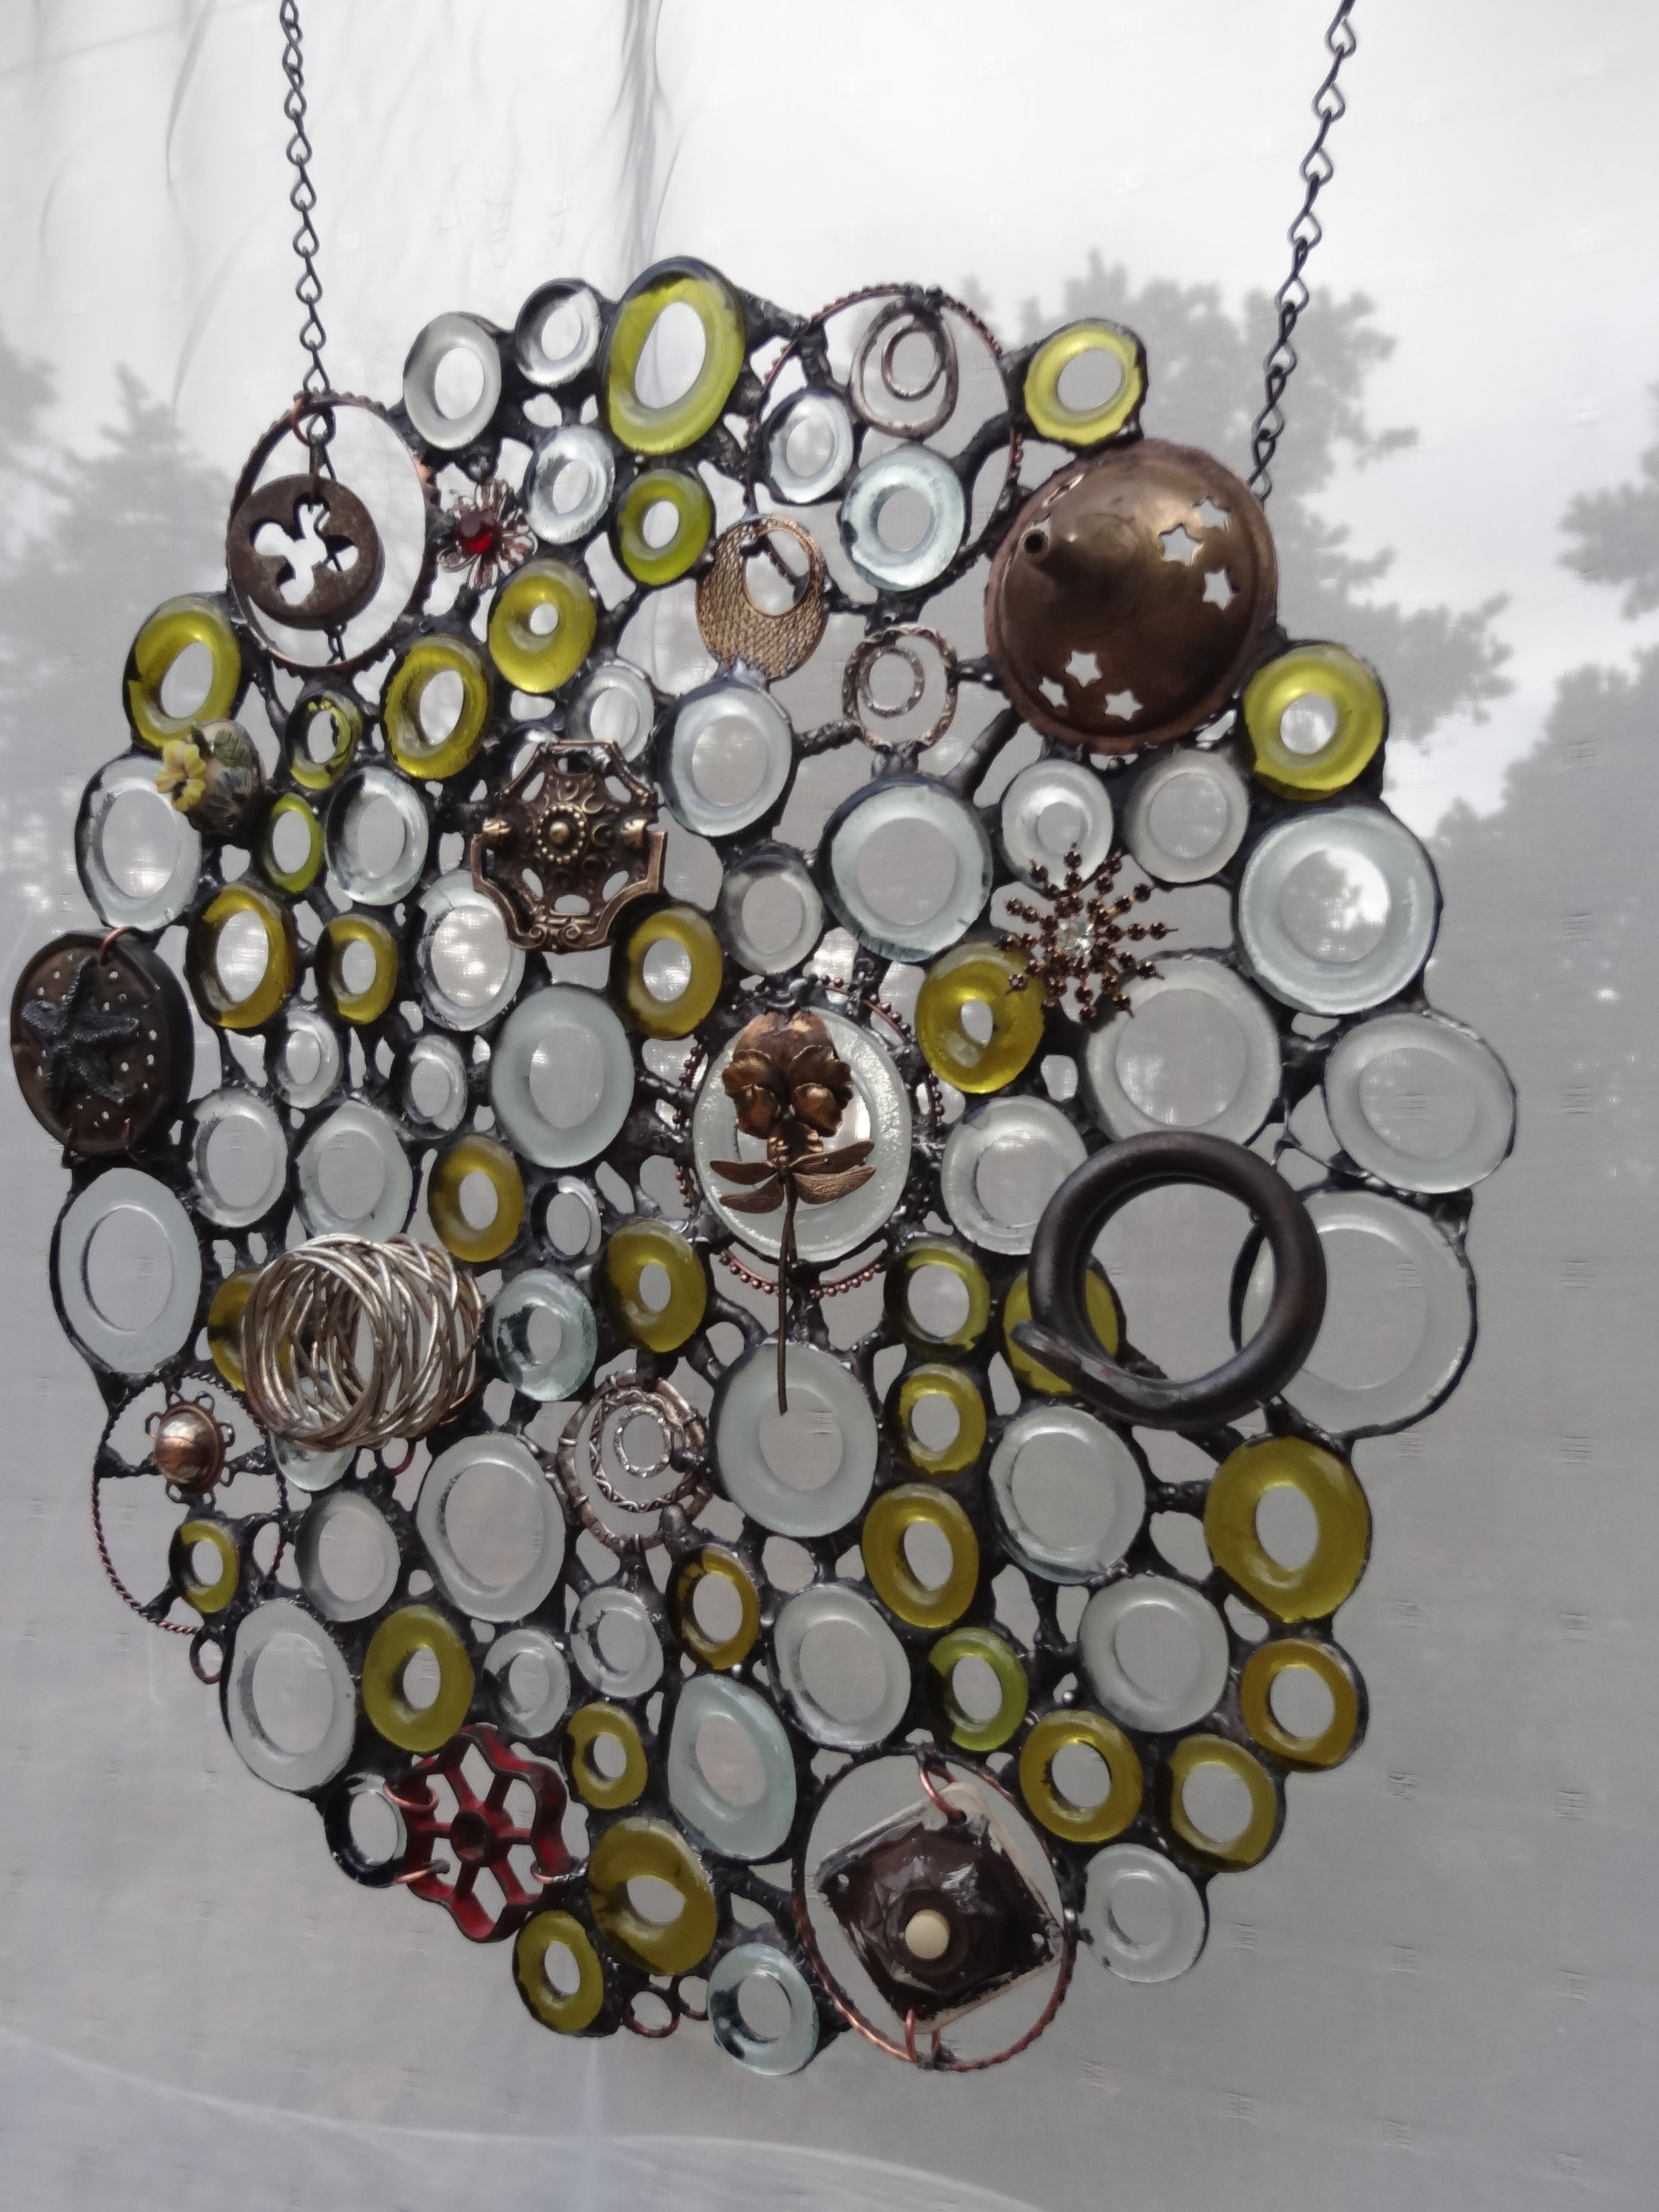 HUNDREDS-ENDLESS CIRCLE SERIES ~ 18"X17" Recycled glass and metals 